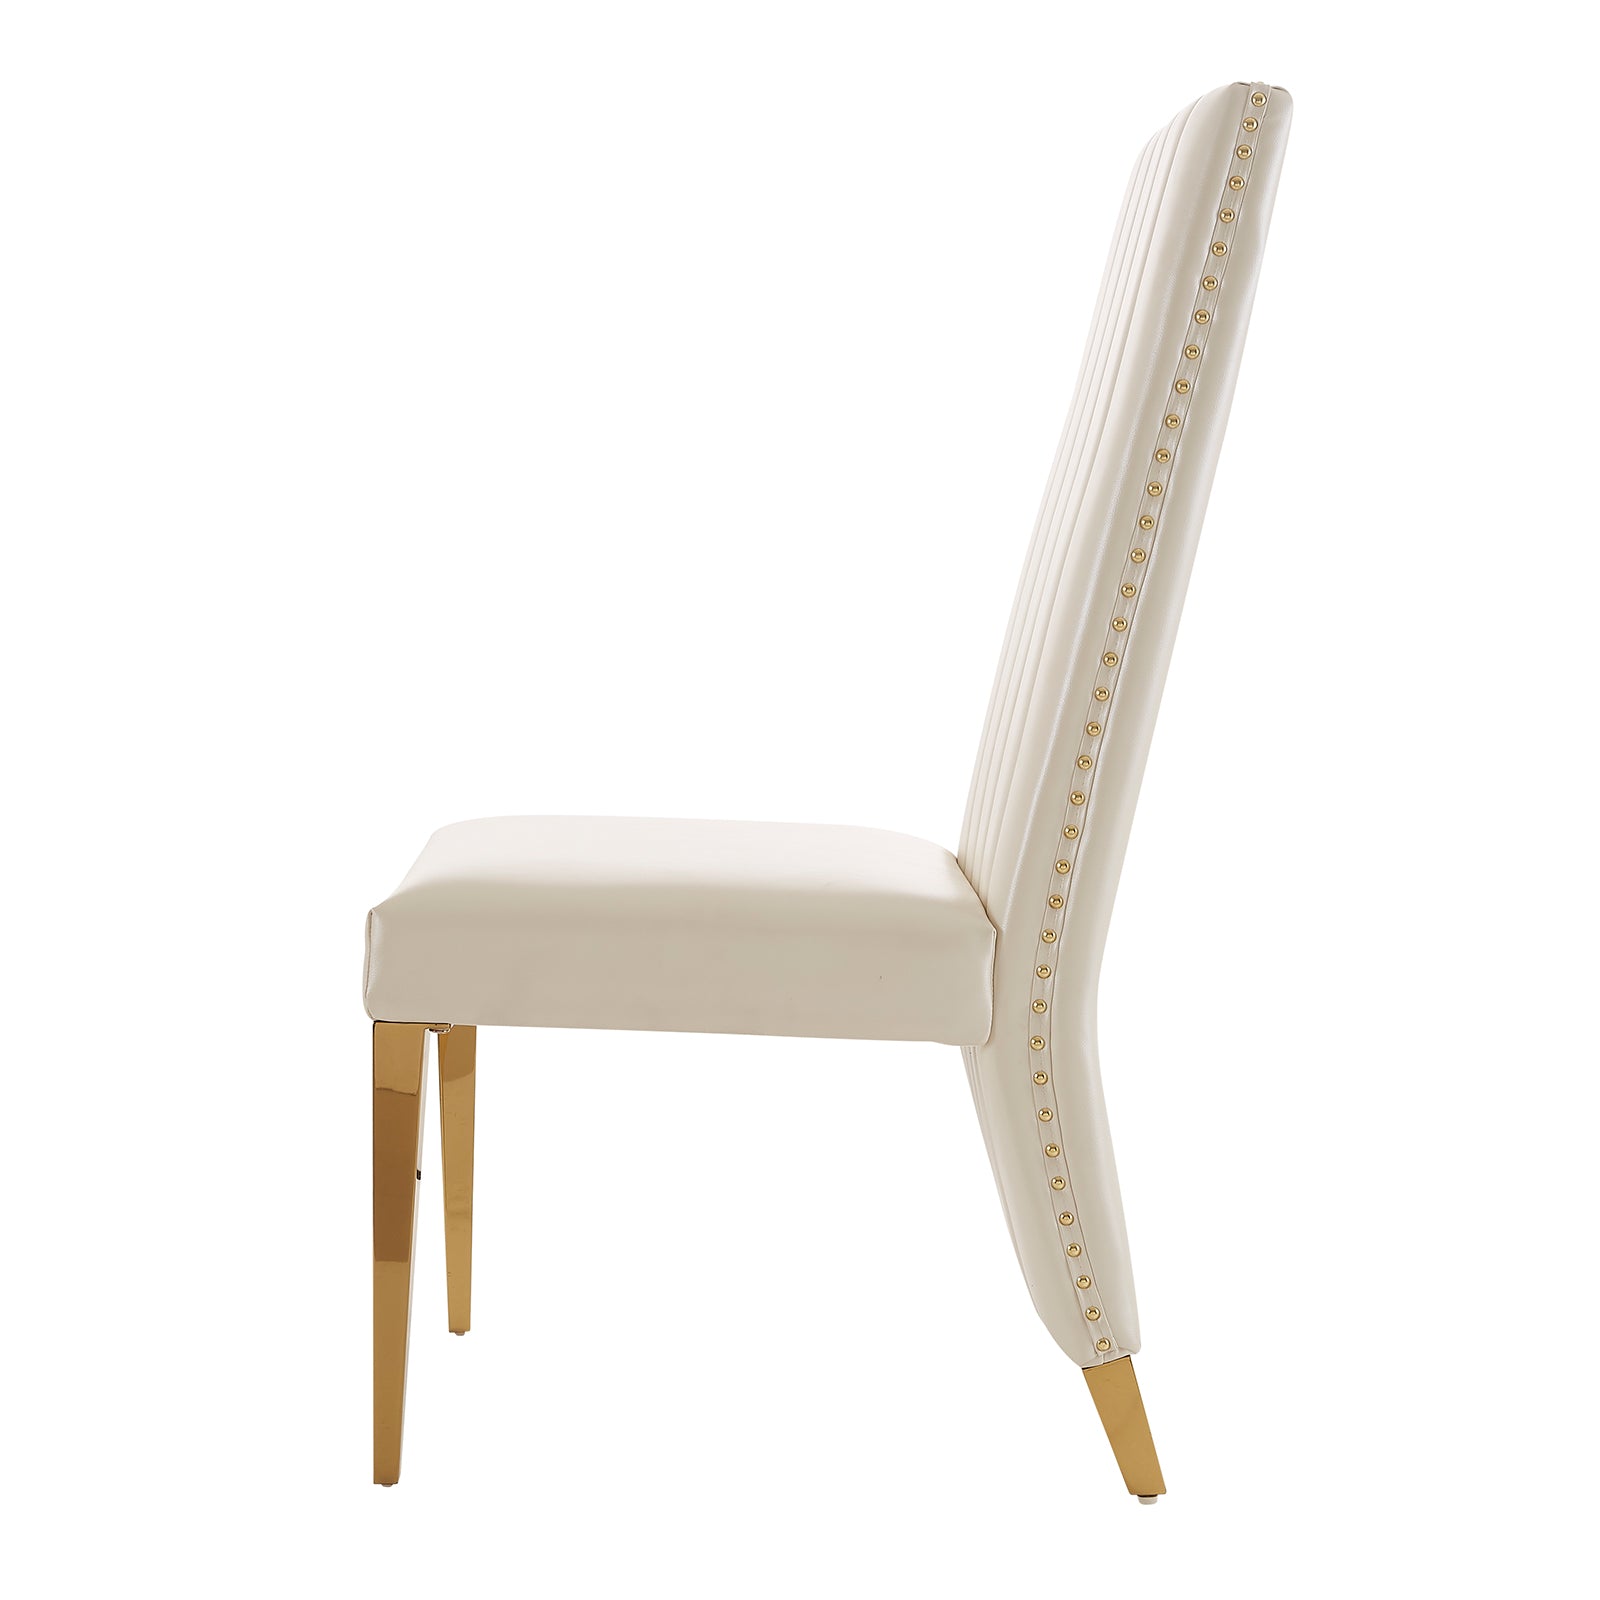 676-Set | AUZ White and Gold Dining room Sets for 6